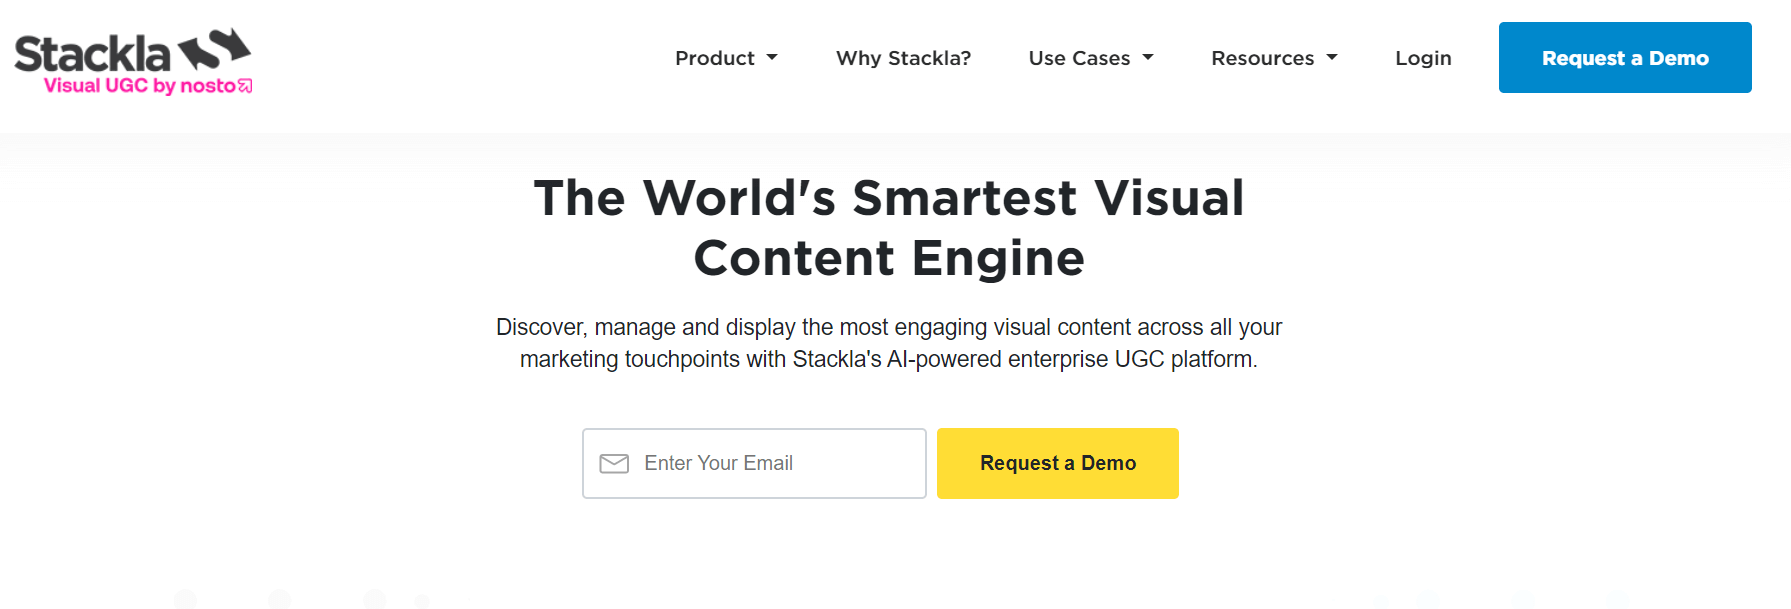 Stackla homepage: The World's Smartest Visual Content Engine